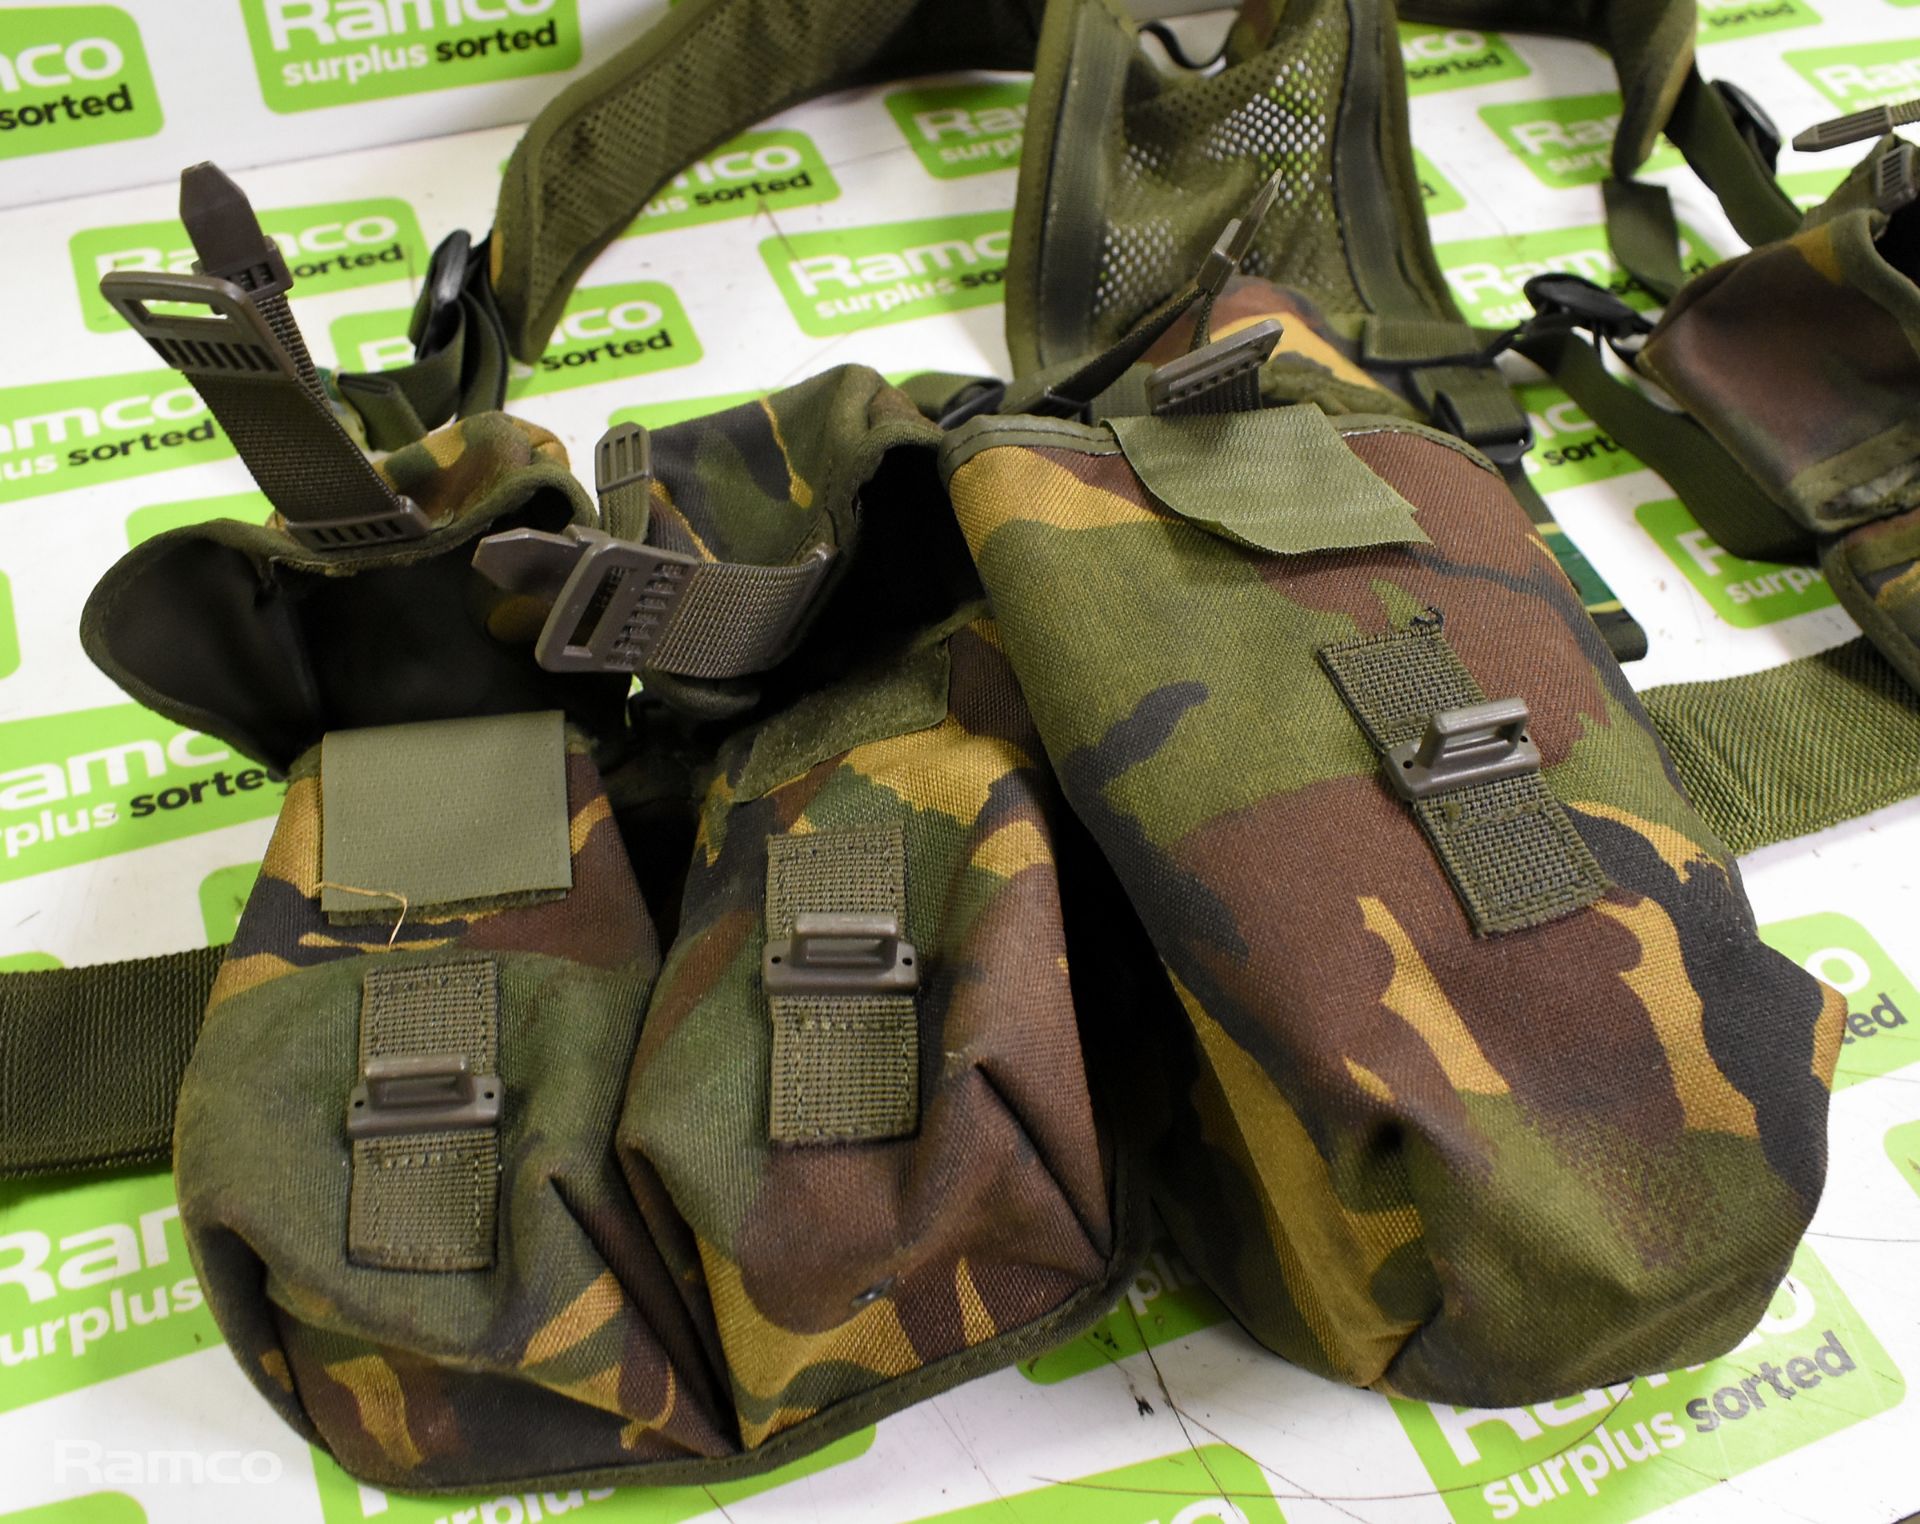 8x British Army DPM vests with pouch - mixed grades and sizes - Image 3 of 11